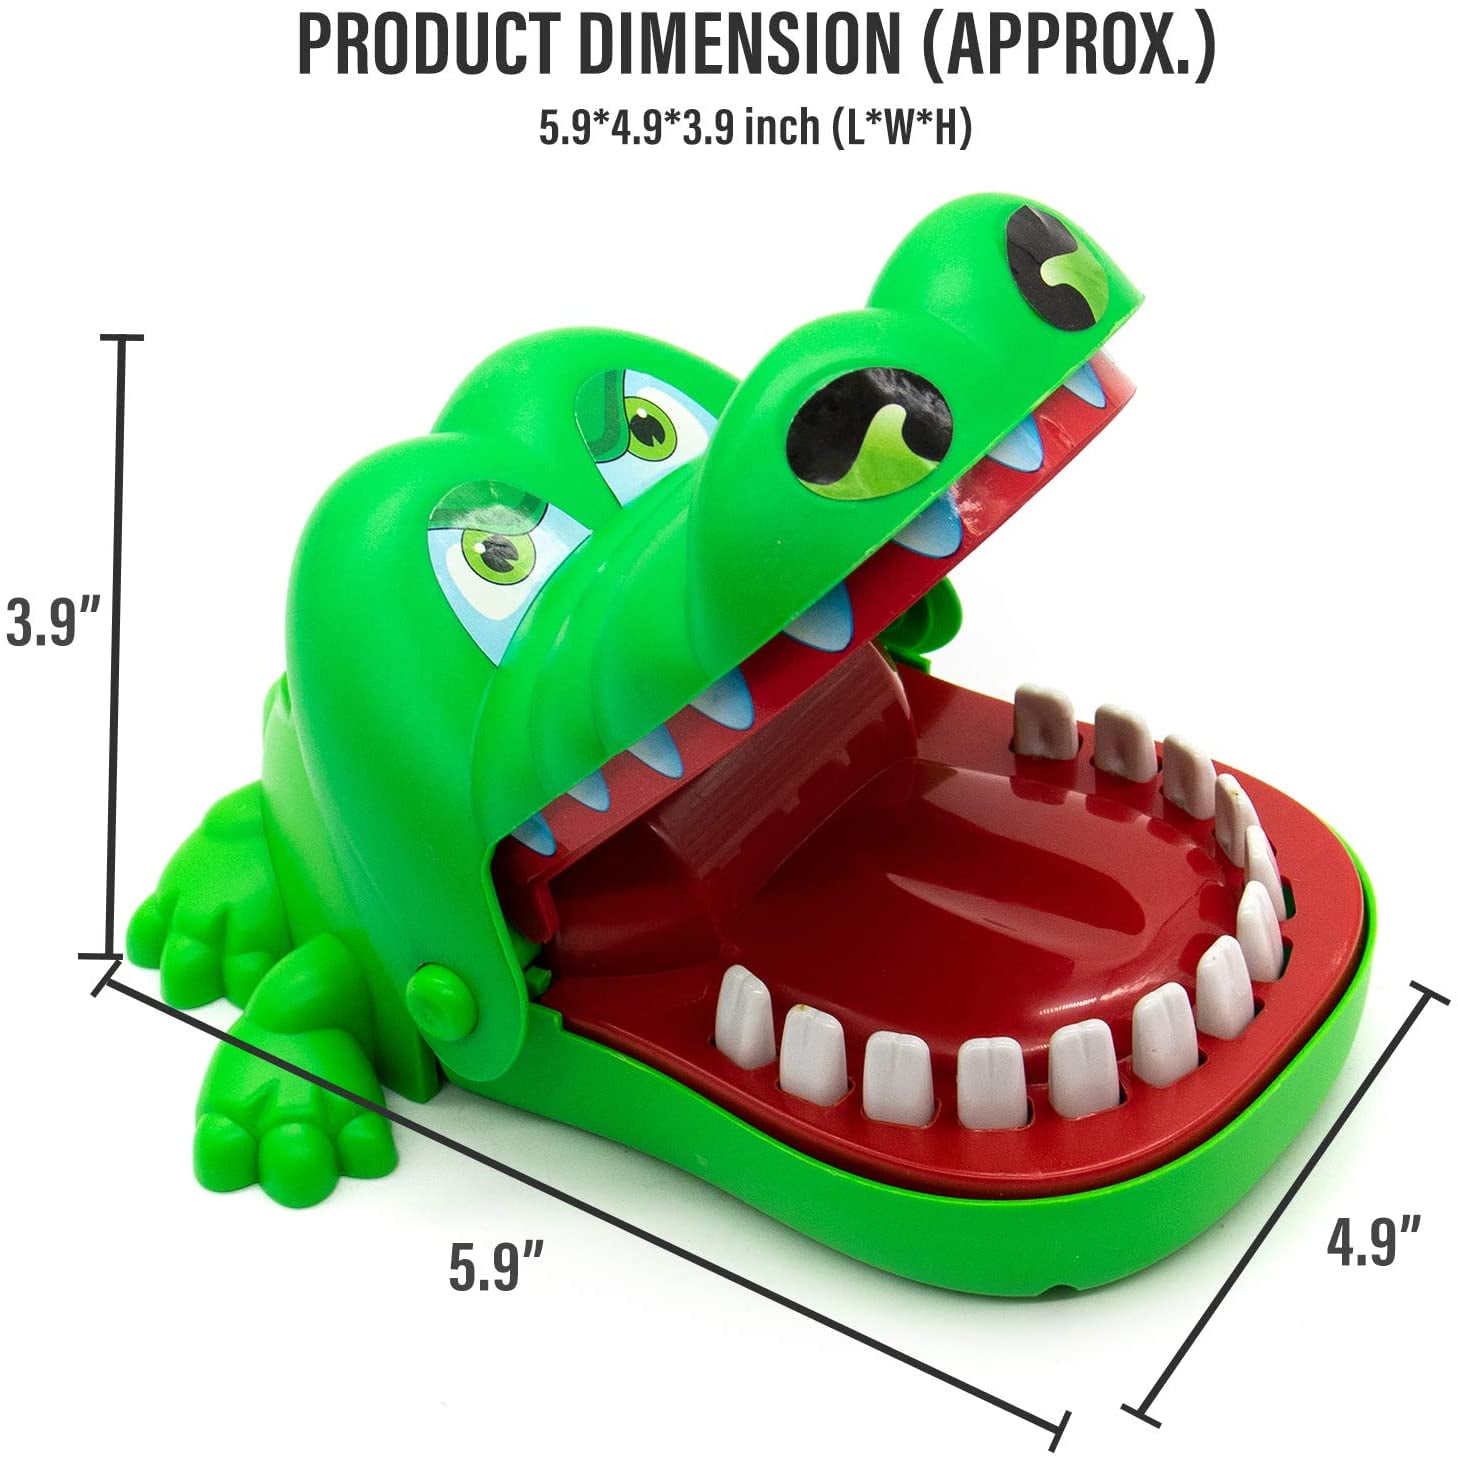 Funny Big Crocodile Mouth Dentist Bite Finger Toy Family Game For Kids Xmas Gift 